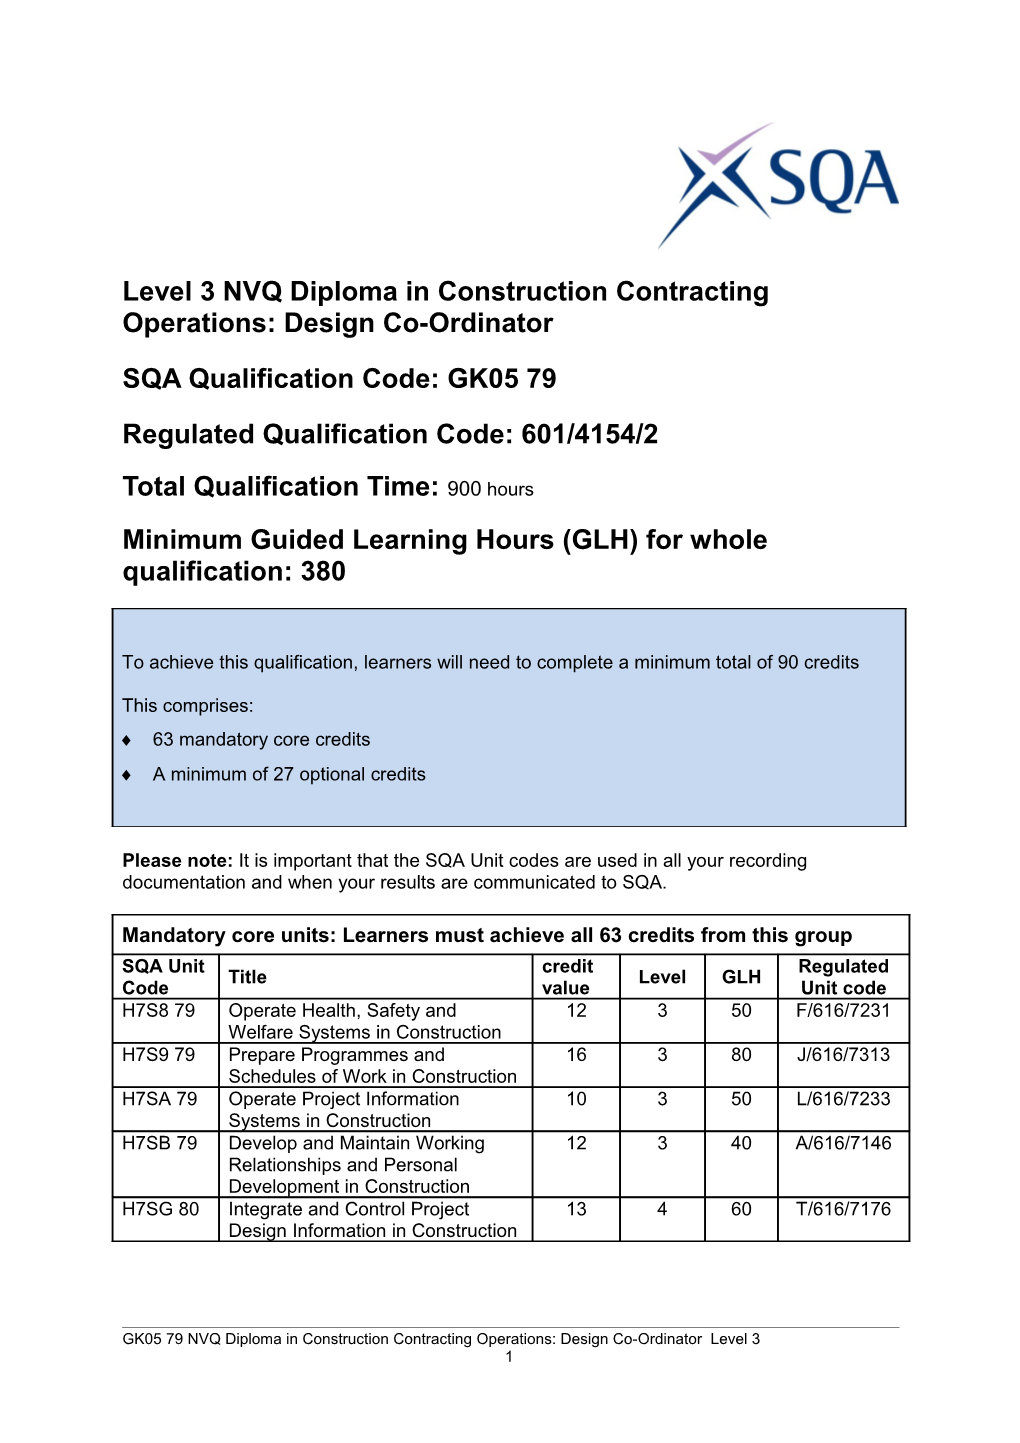 Level 3 Nvqdiploma in Construction Contracting Operations: Design Co-Ordinator